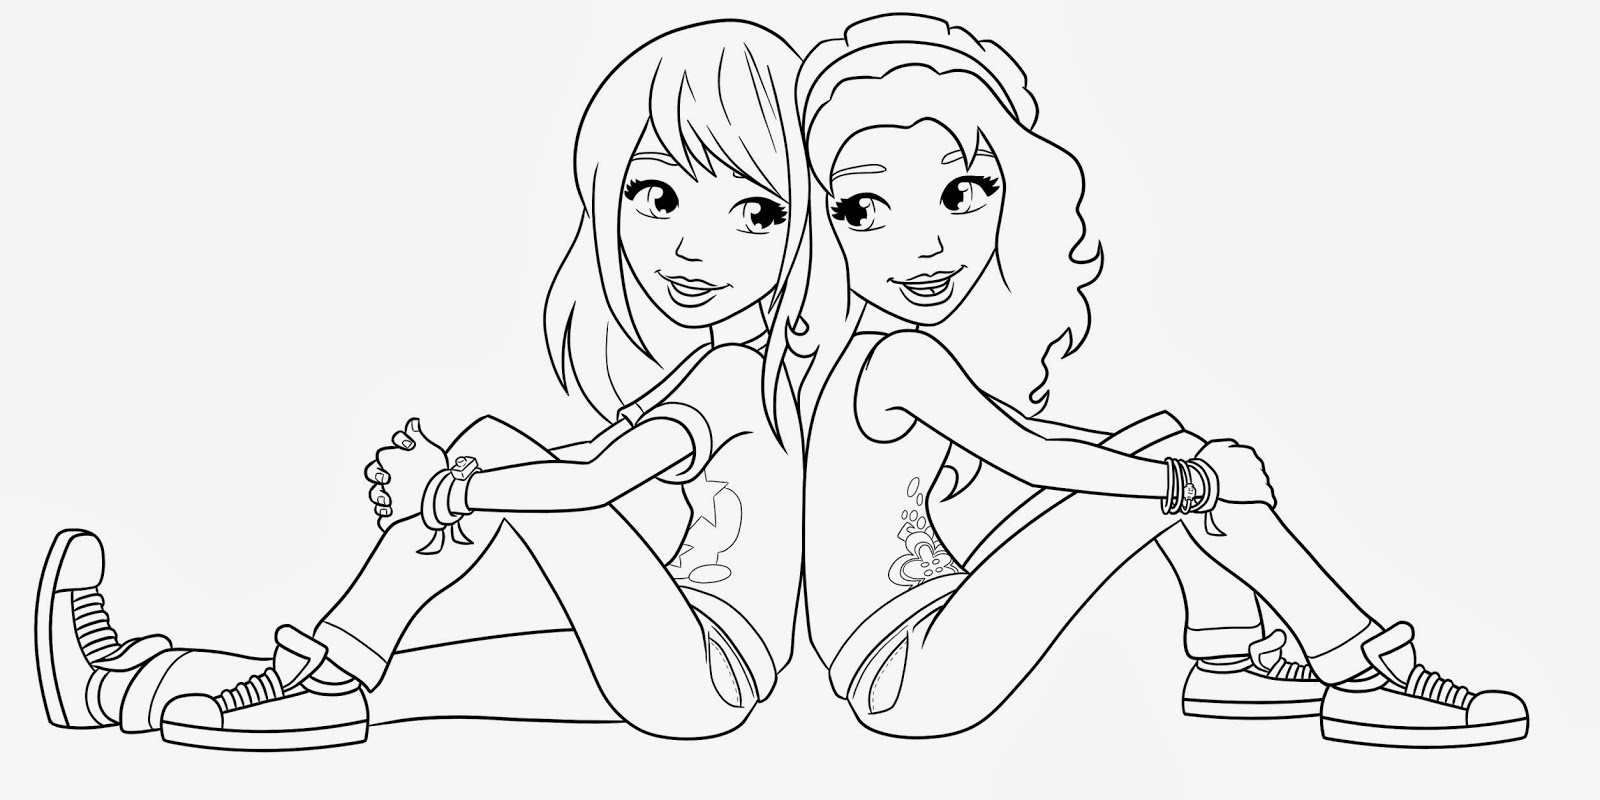 coloring pages of bffs best friends coloring pages best coloring pages for kids of coloring bffs pages 